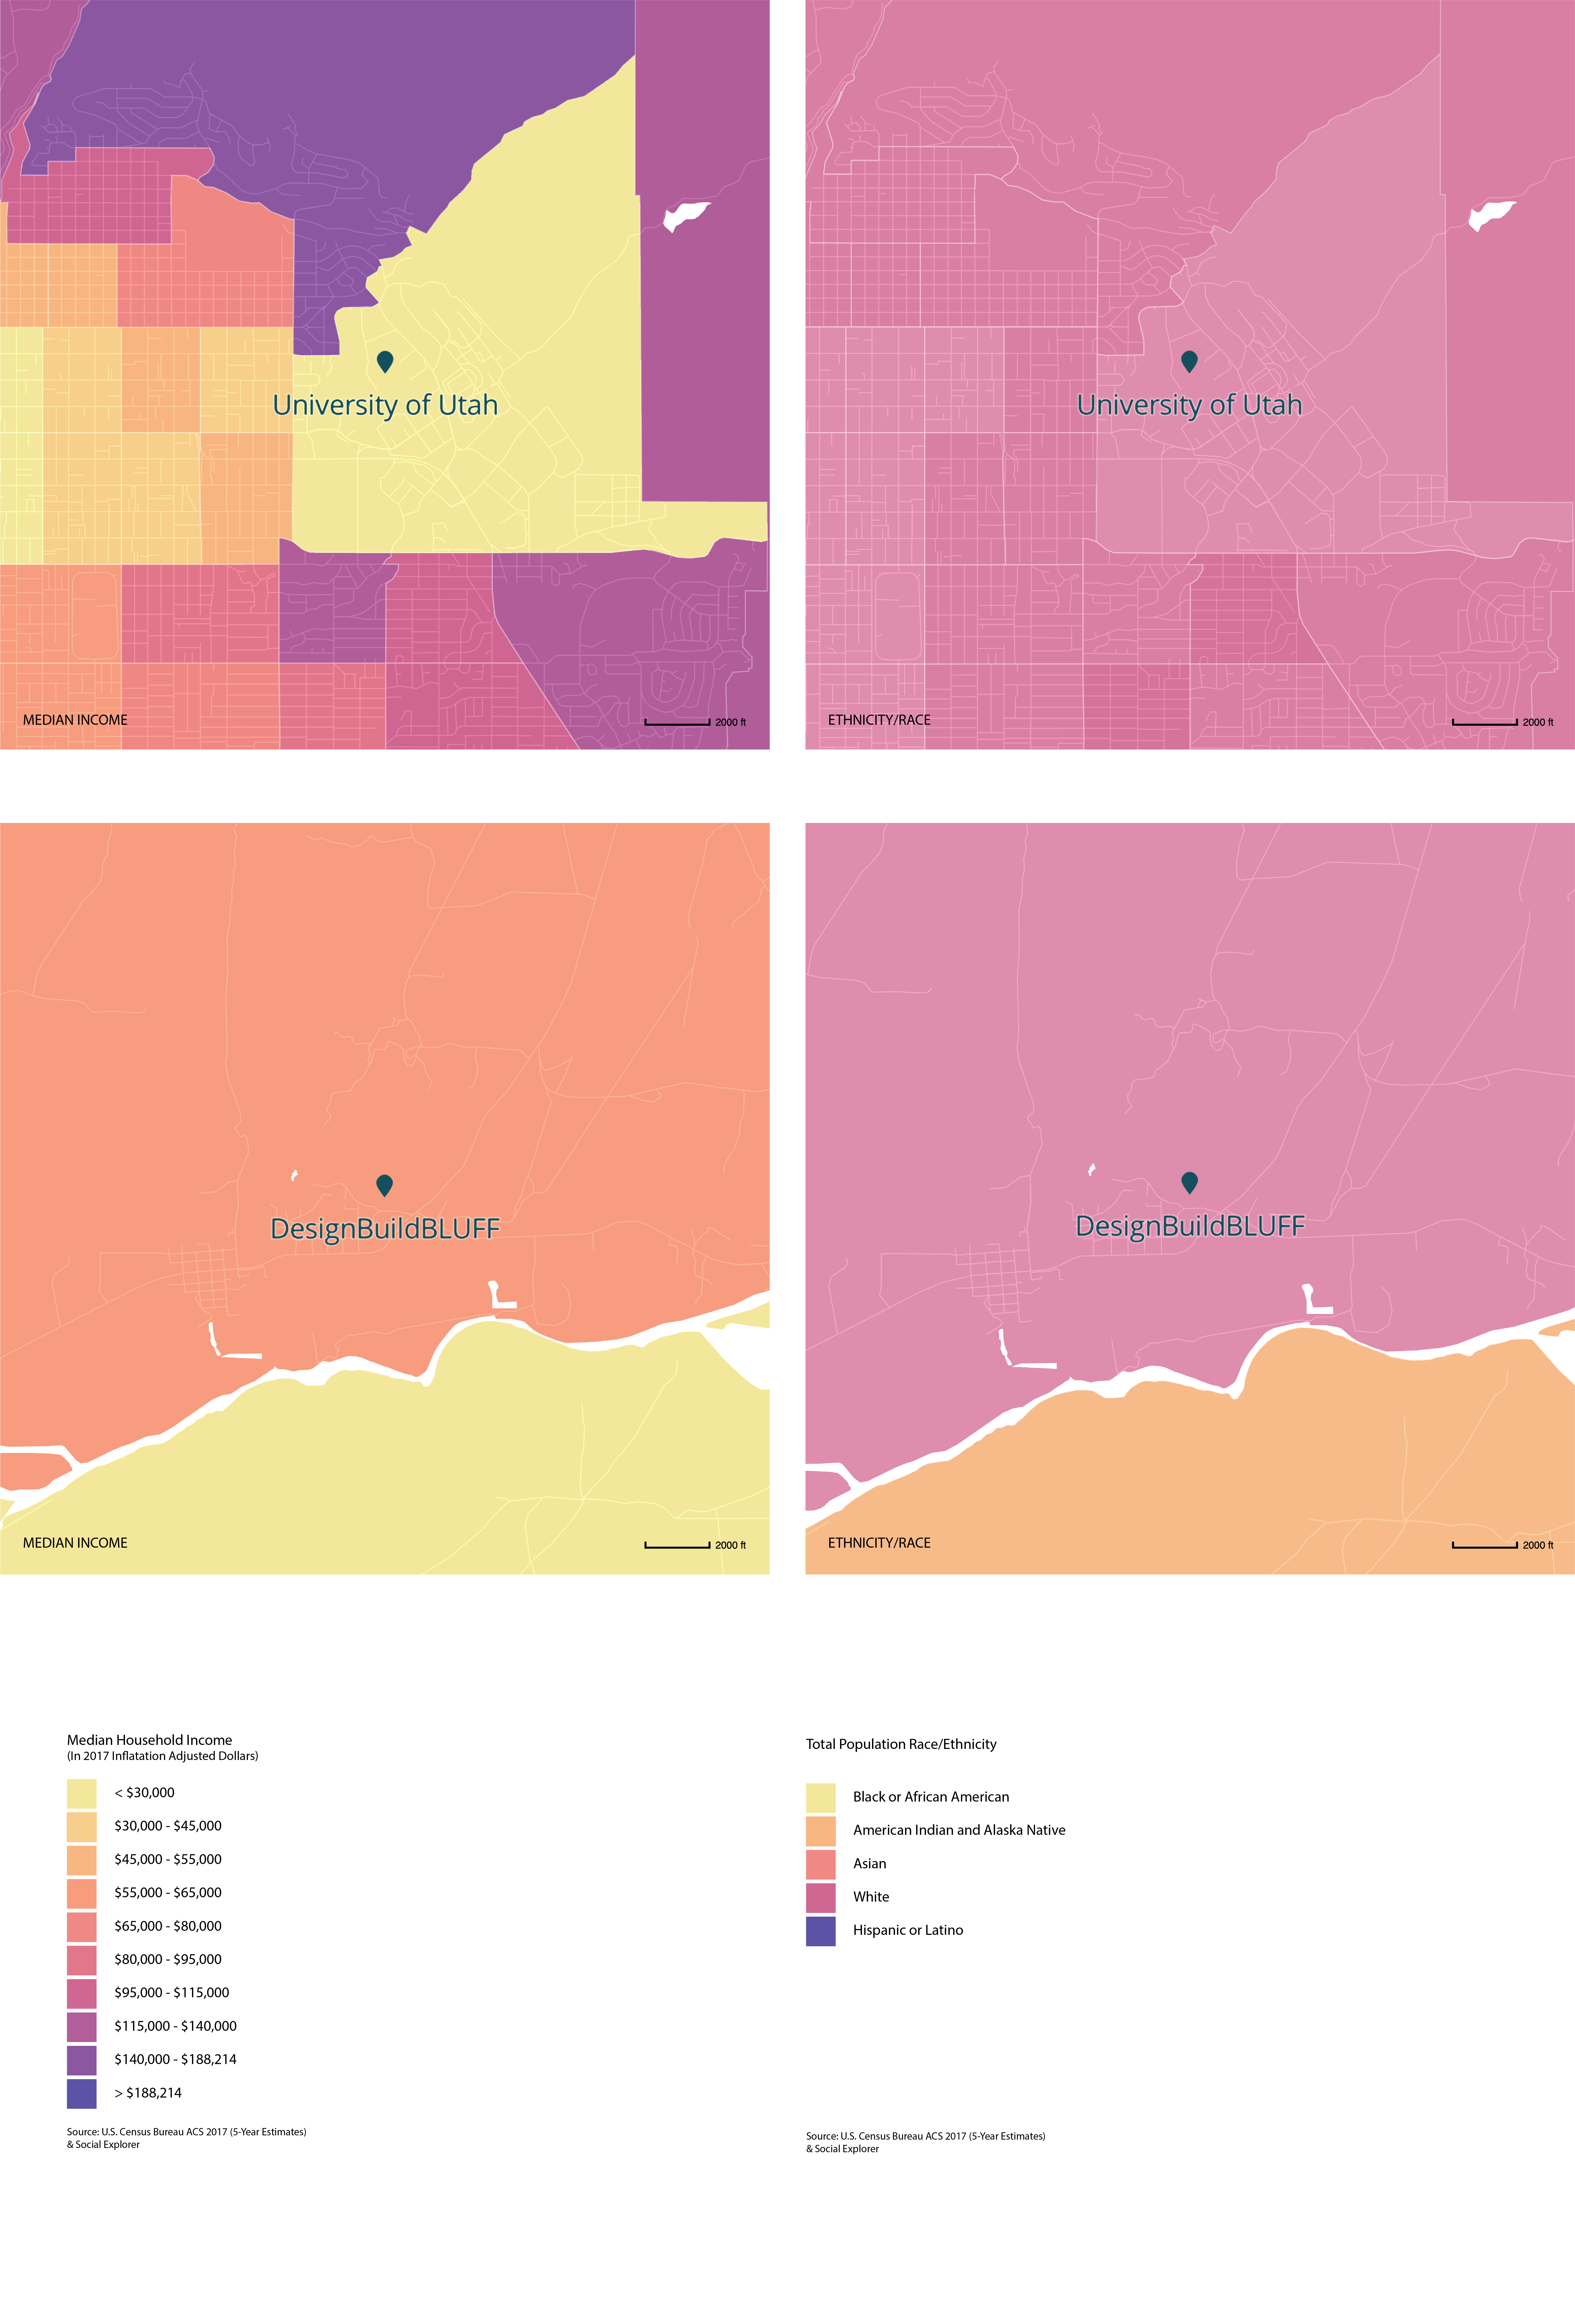 Income and Racial Demographics of Areas Surrounding the University of Utah and DesignBuildBLUFF